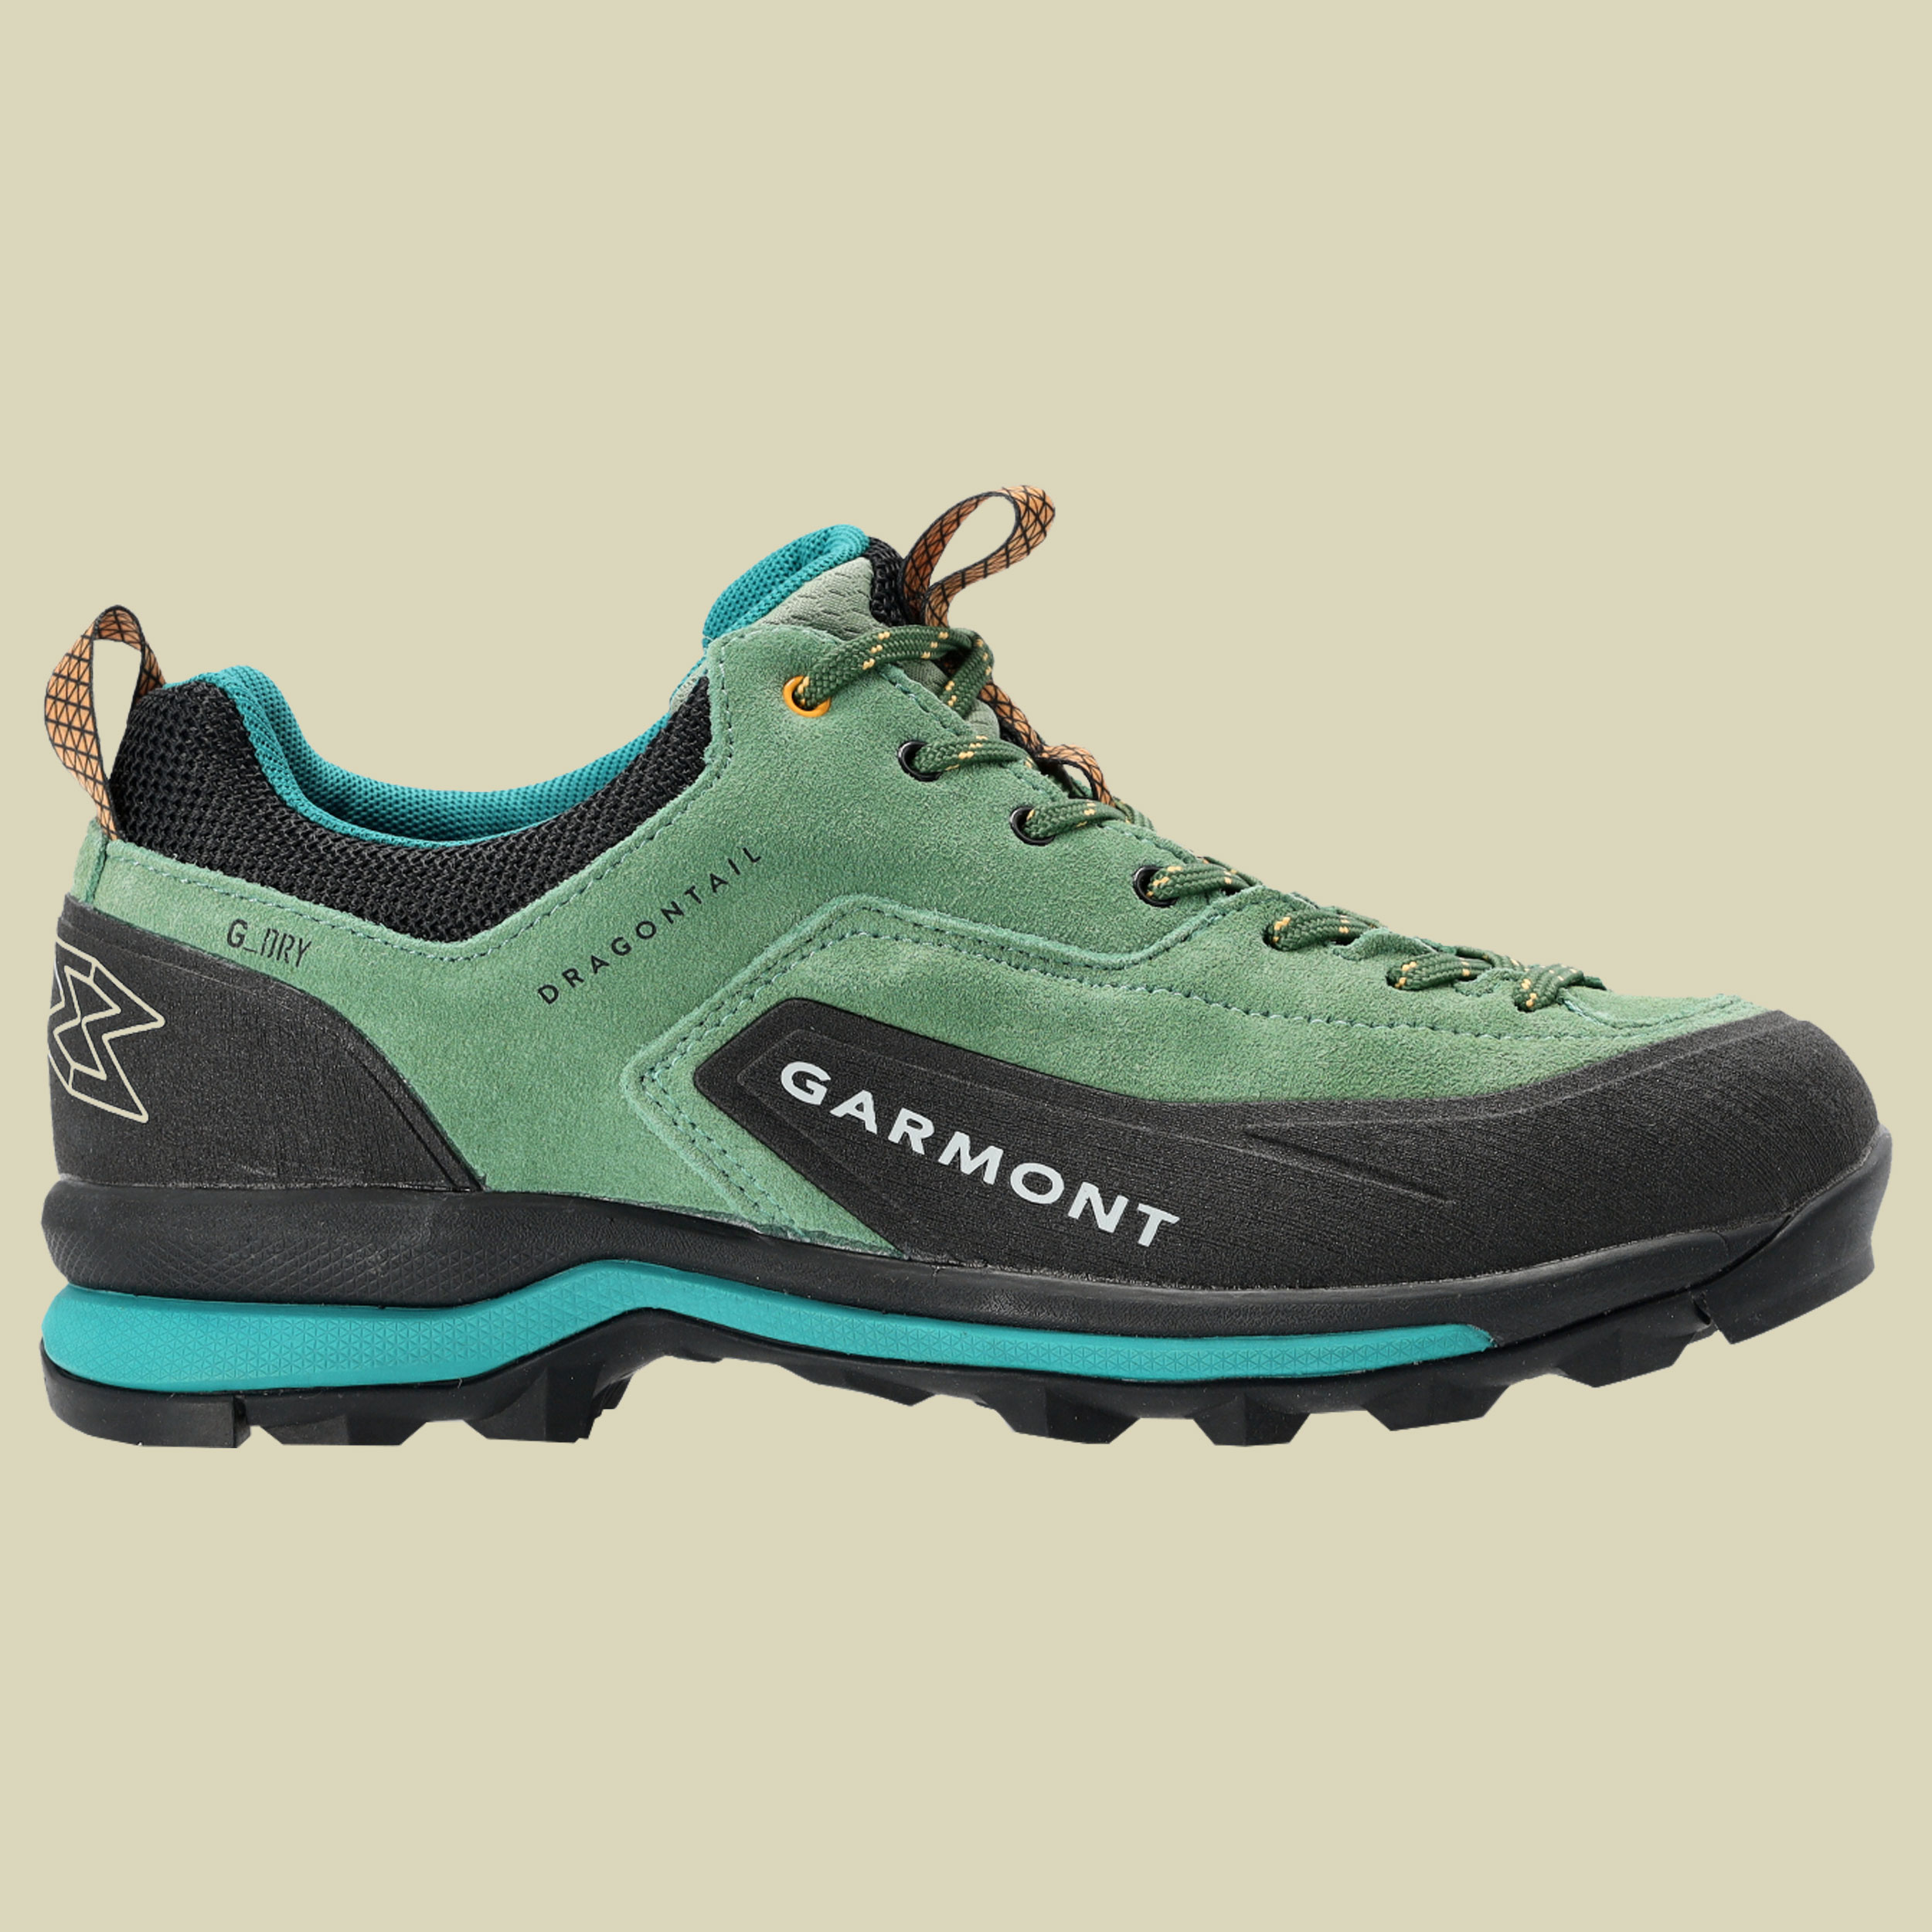 Dragontail G-Dry Women Größe UK 4,5 Farbe frost green